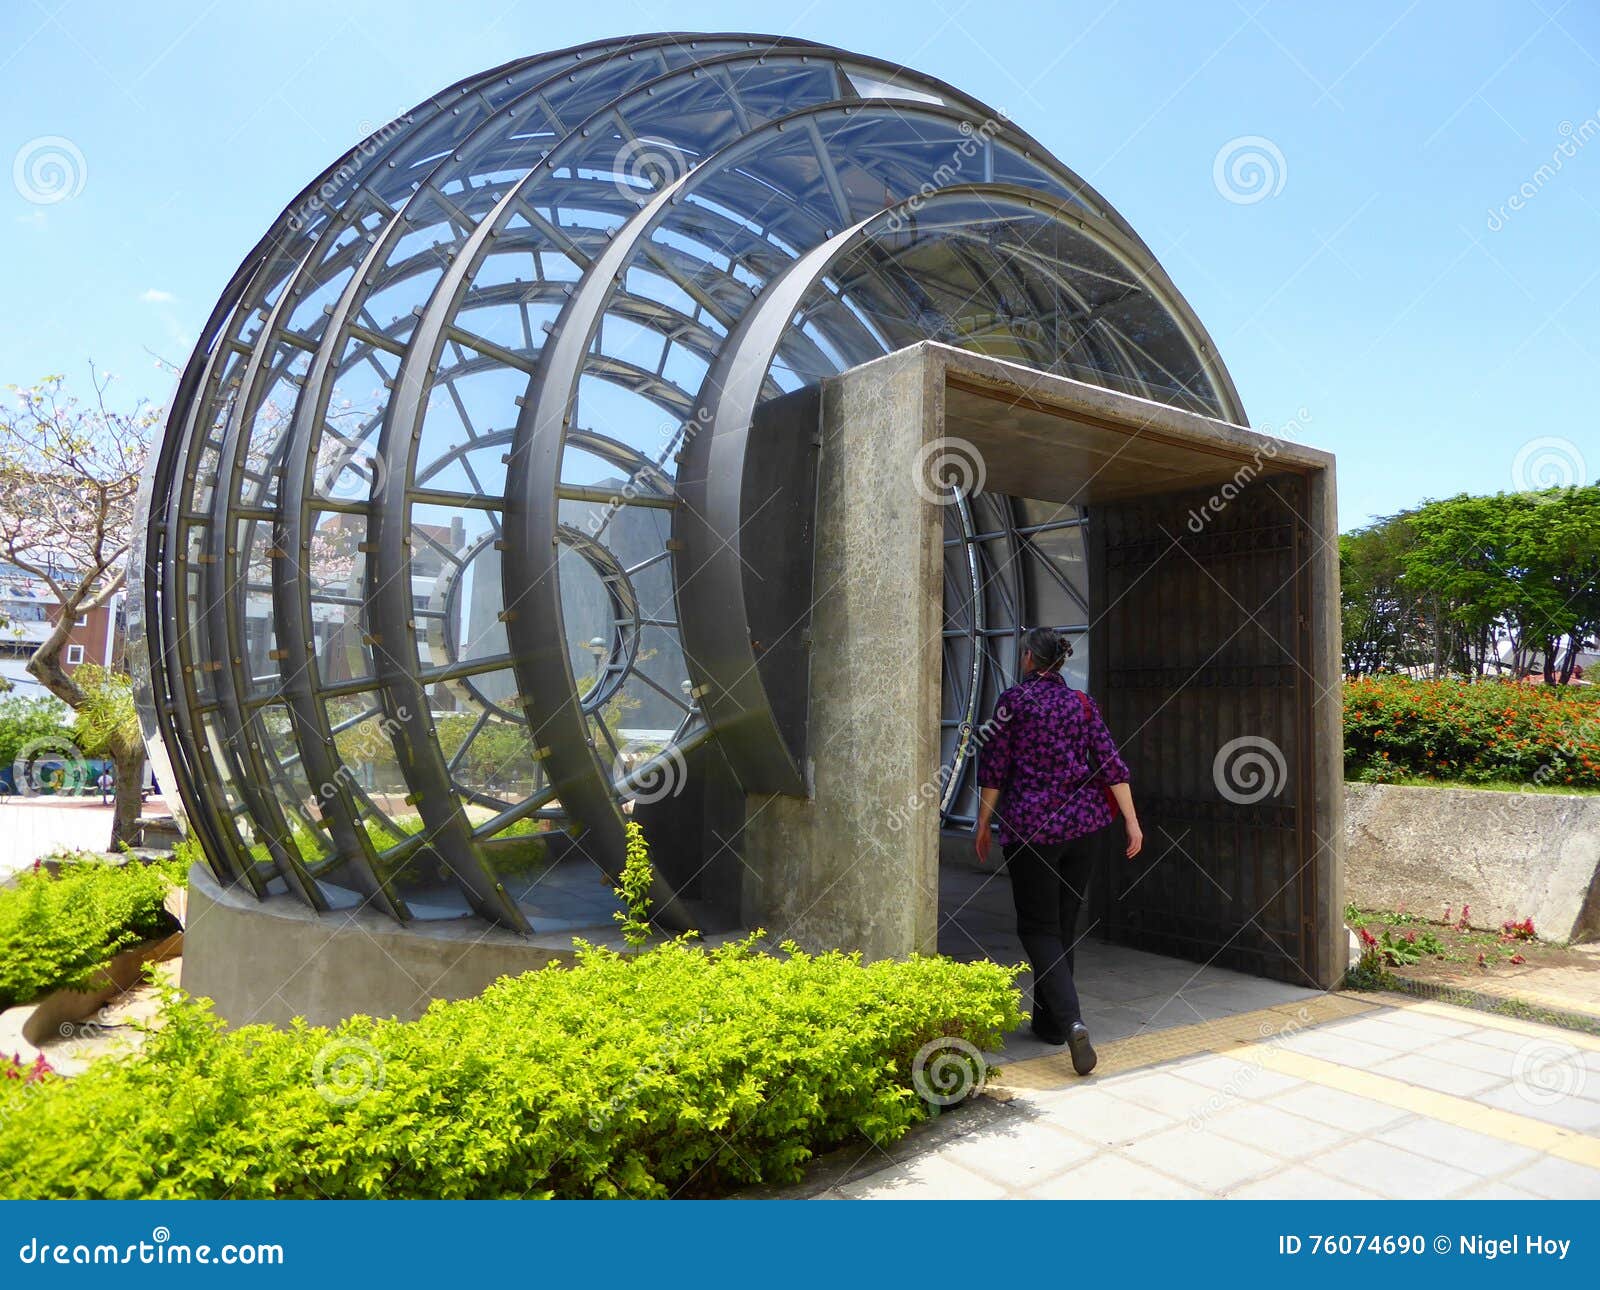 Woman Entering Circular Steel And Glass Orb Editorial Image